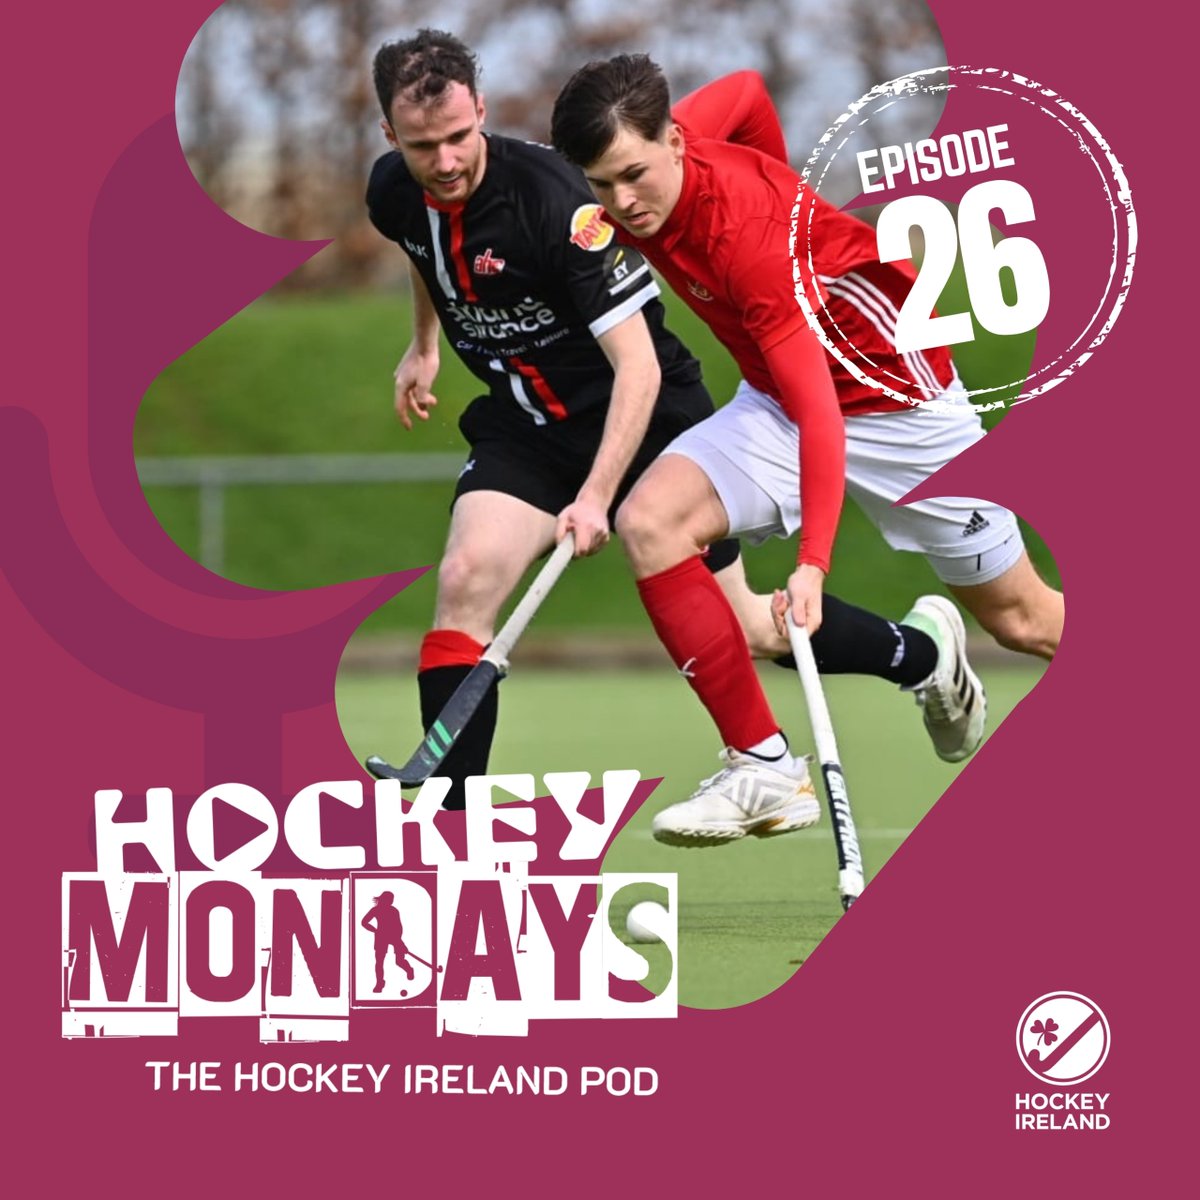 Hockey Mondays now available. We hope you get the chance to listen out this week. And remember, share your thoughts for future content in the comments. 👉 Episode #26 available at hockey.ie or click on the link in our bio!